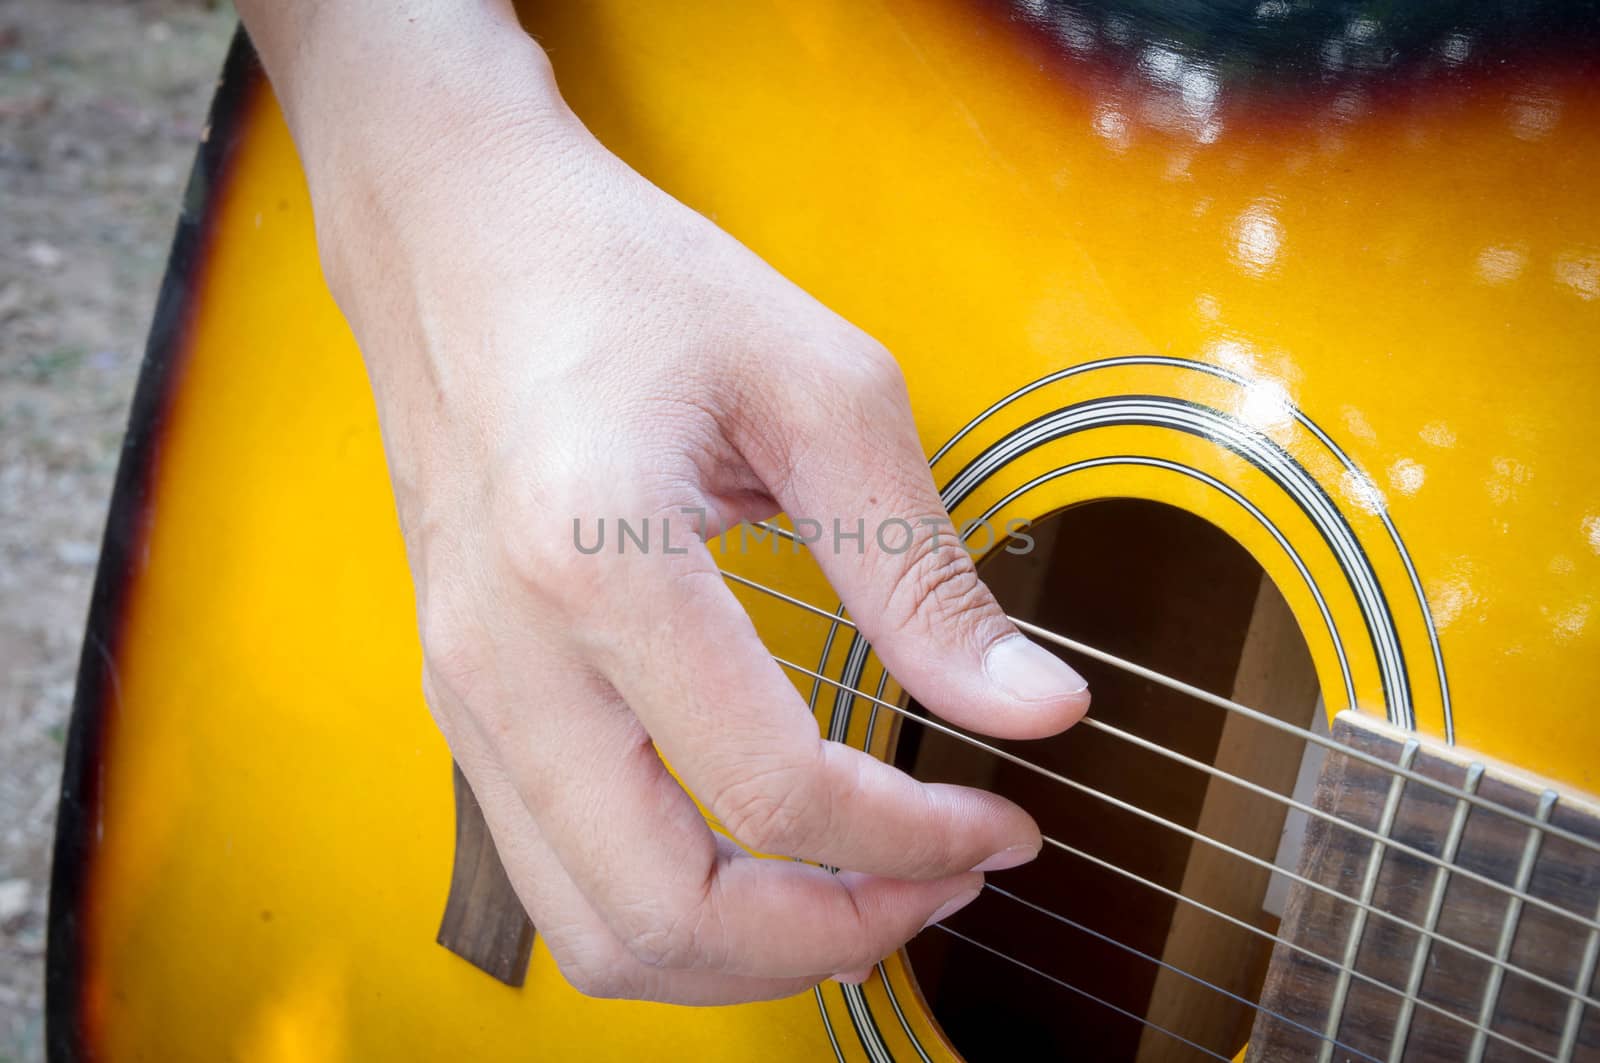 Hand playing acoustic guitar, close up